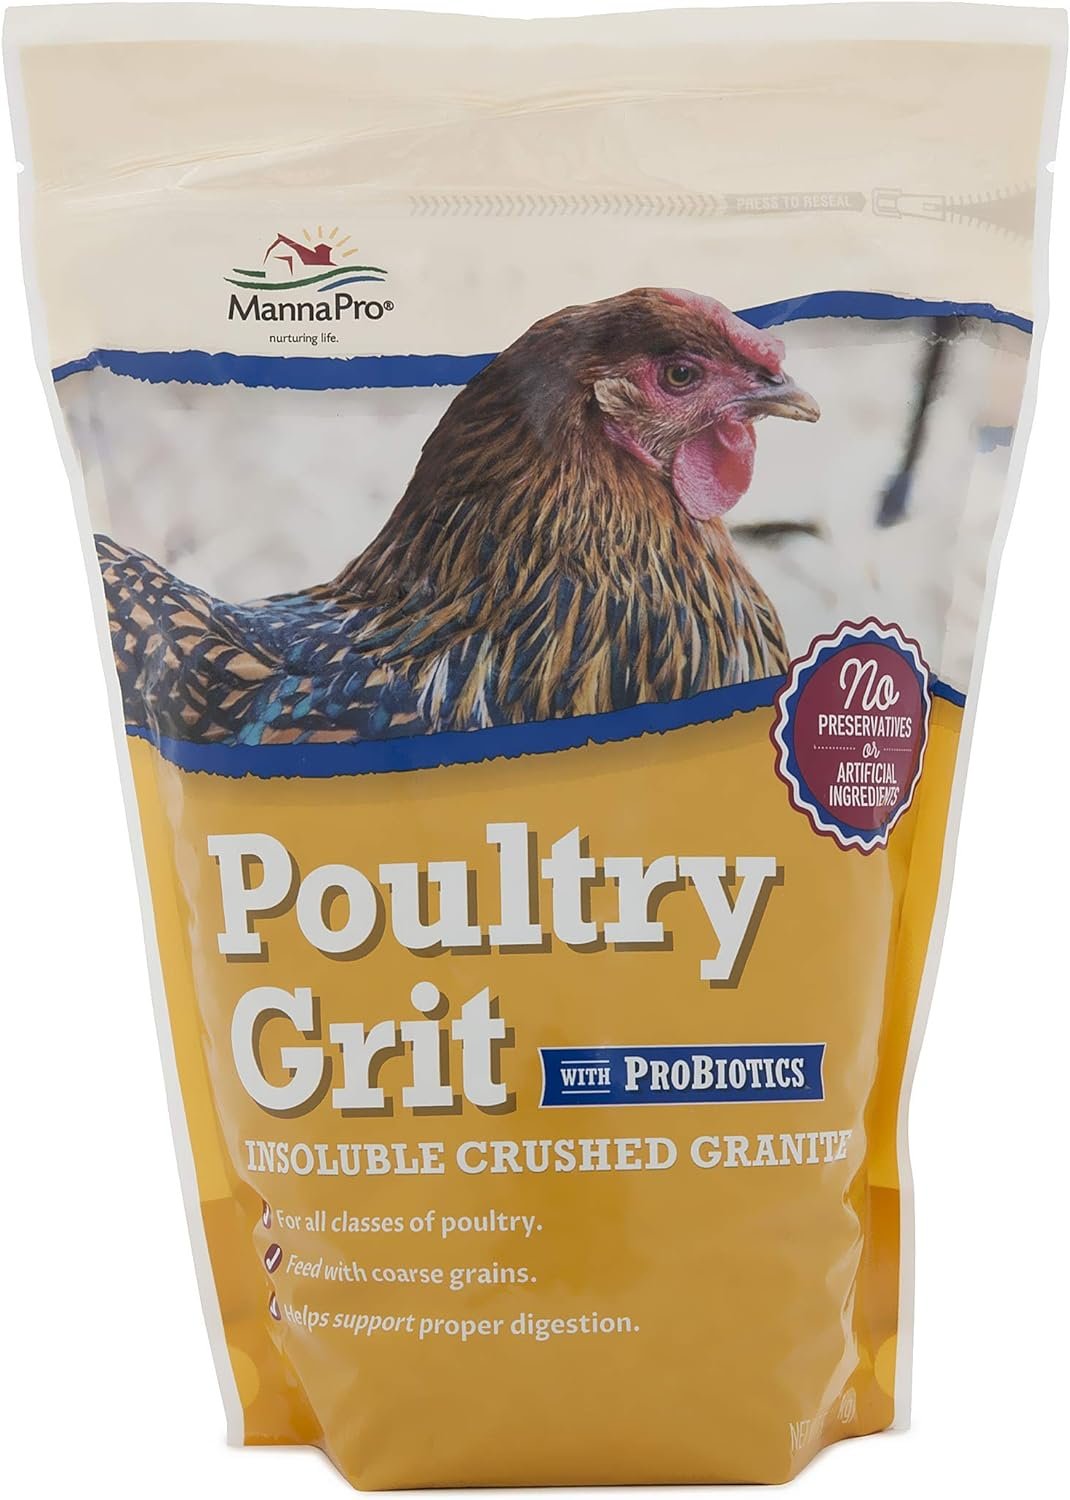 Manna Pro Poultry Grit with Probiotics | Insoluble Crushed Granite | 5 LB (Packaging May Vary)